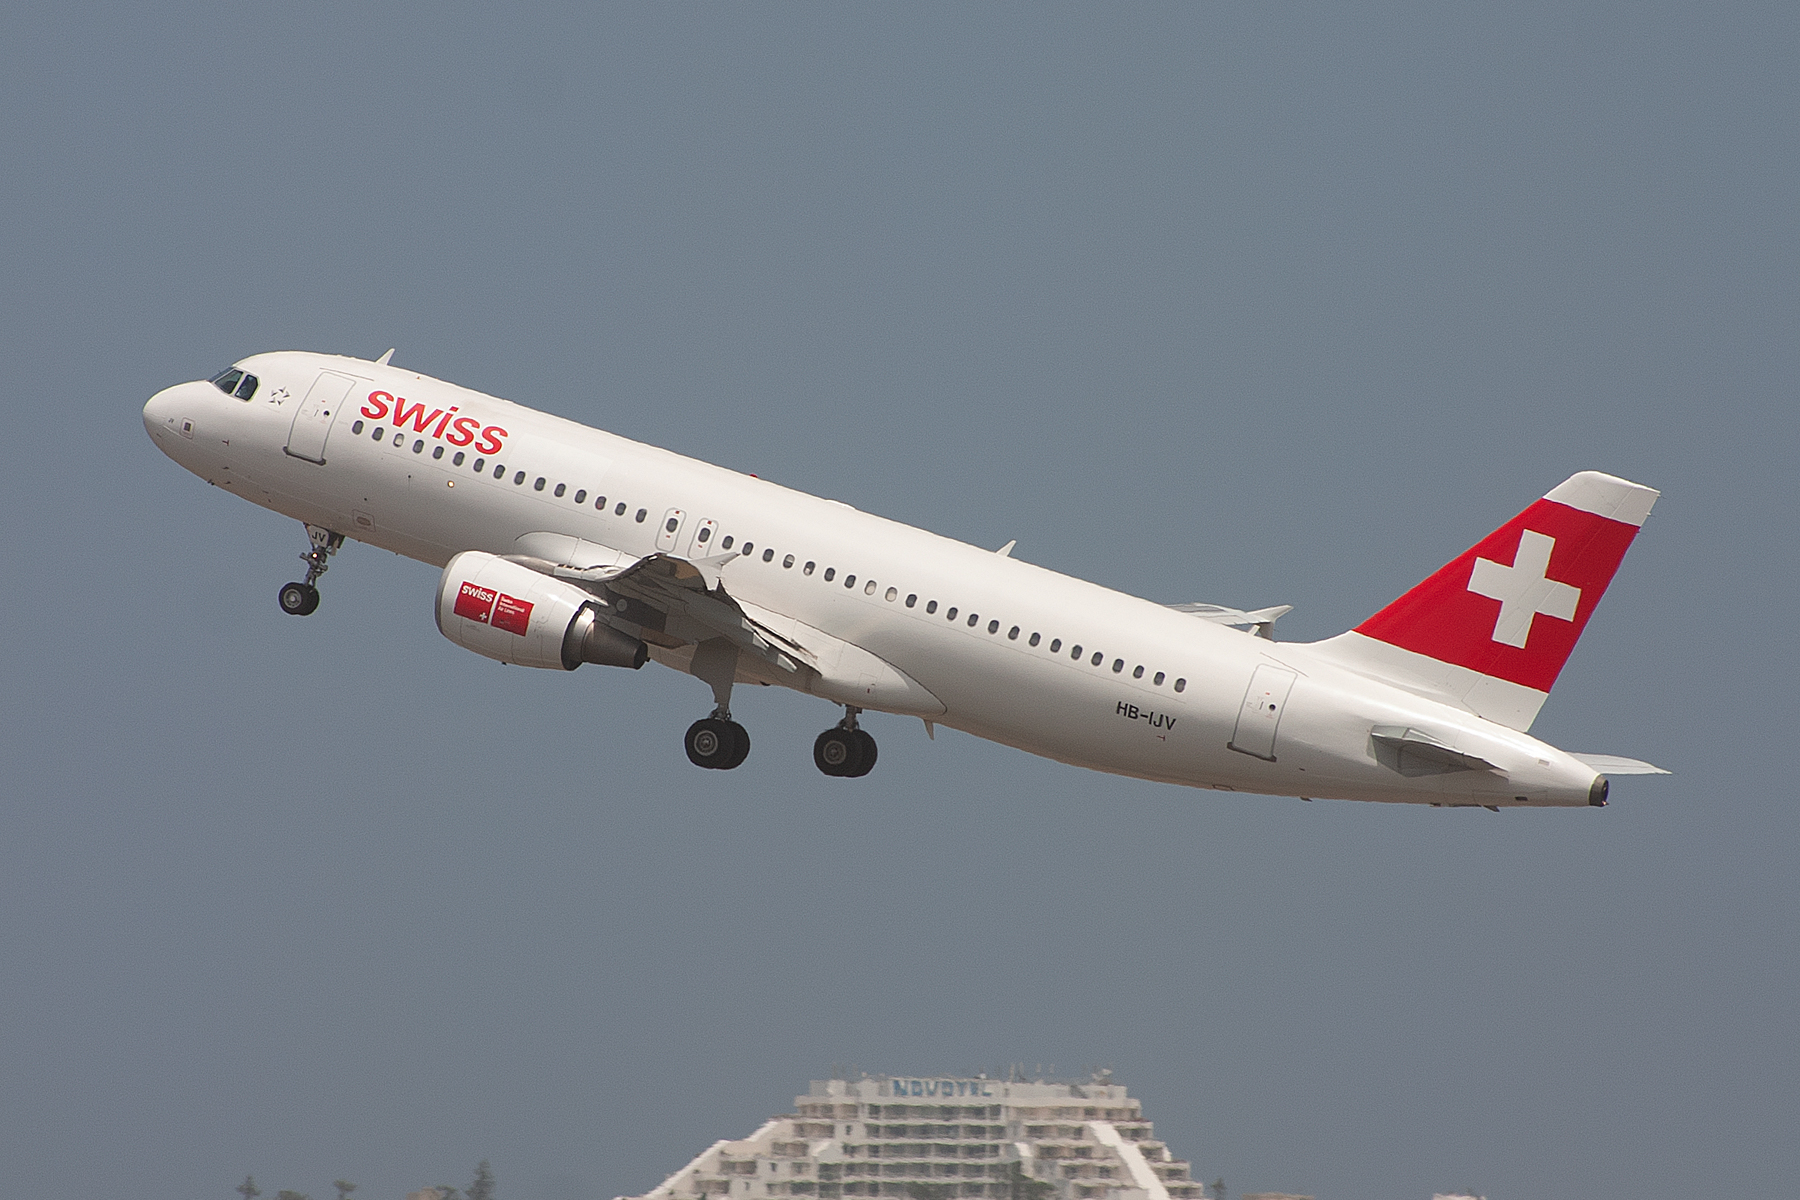 Swiss Int'l Airlines Airbus A320-200 HB-IJV at Kingsford Smith